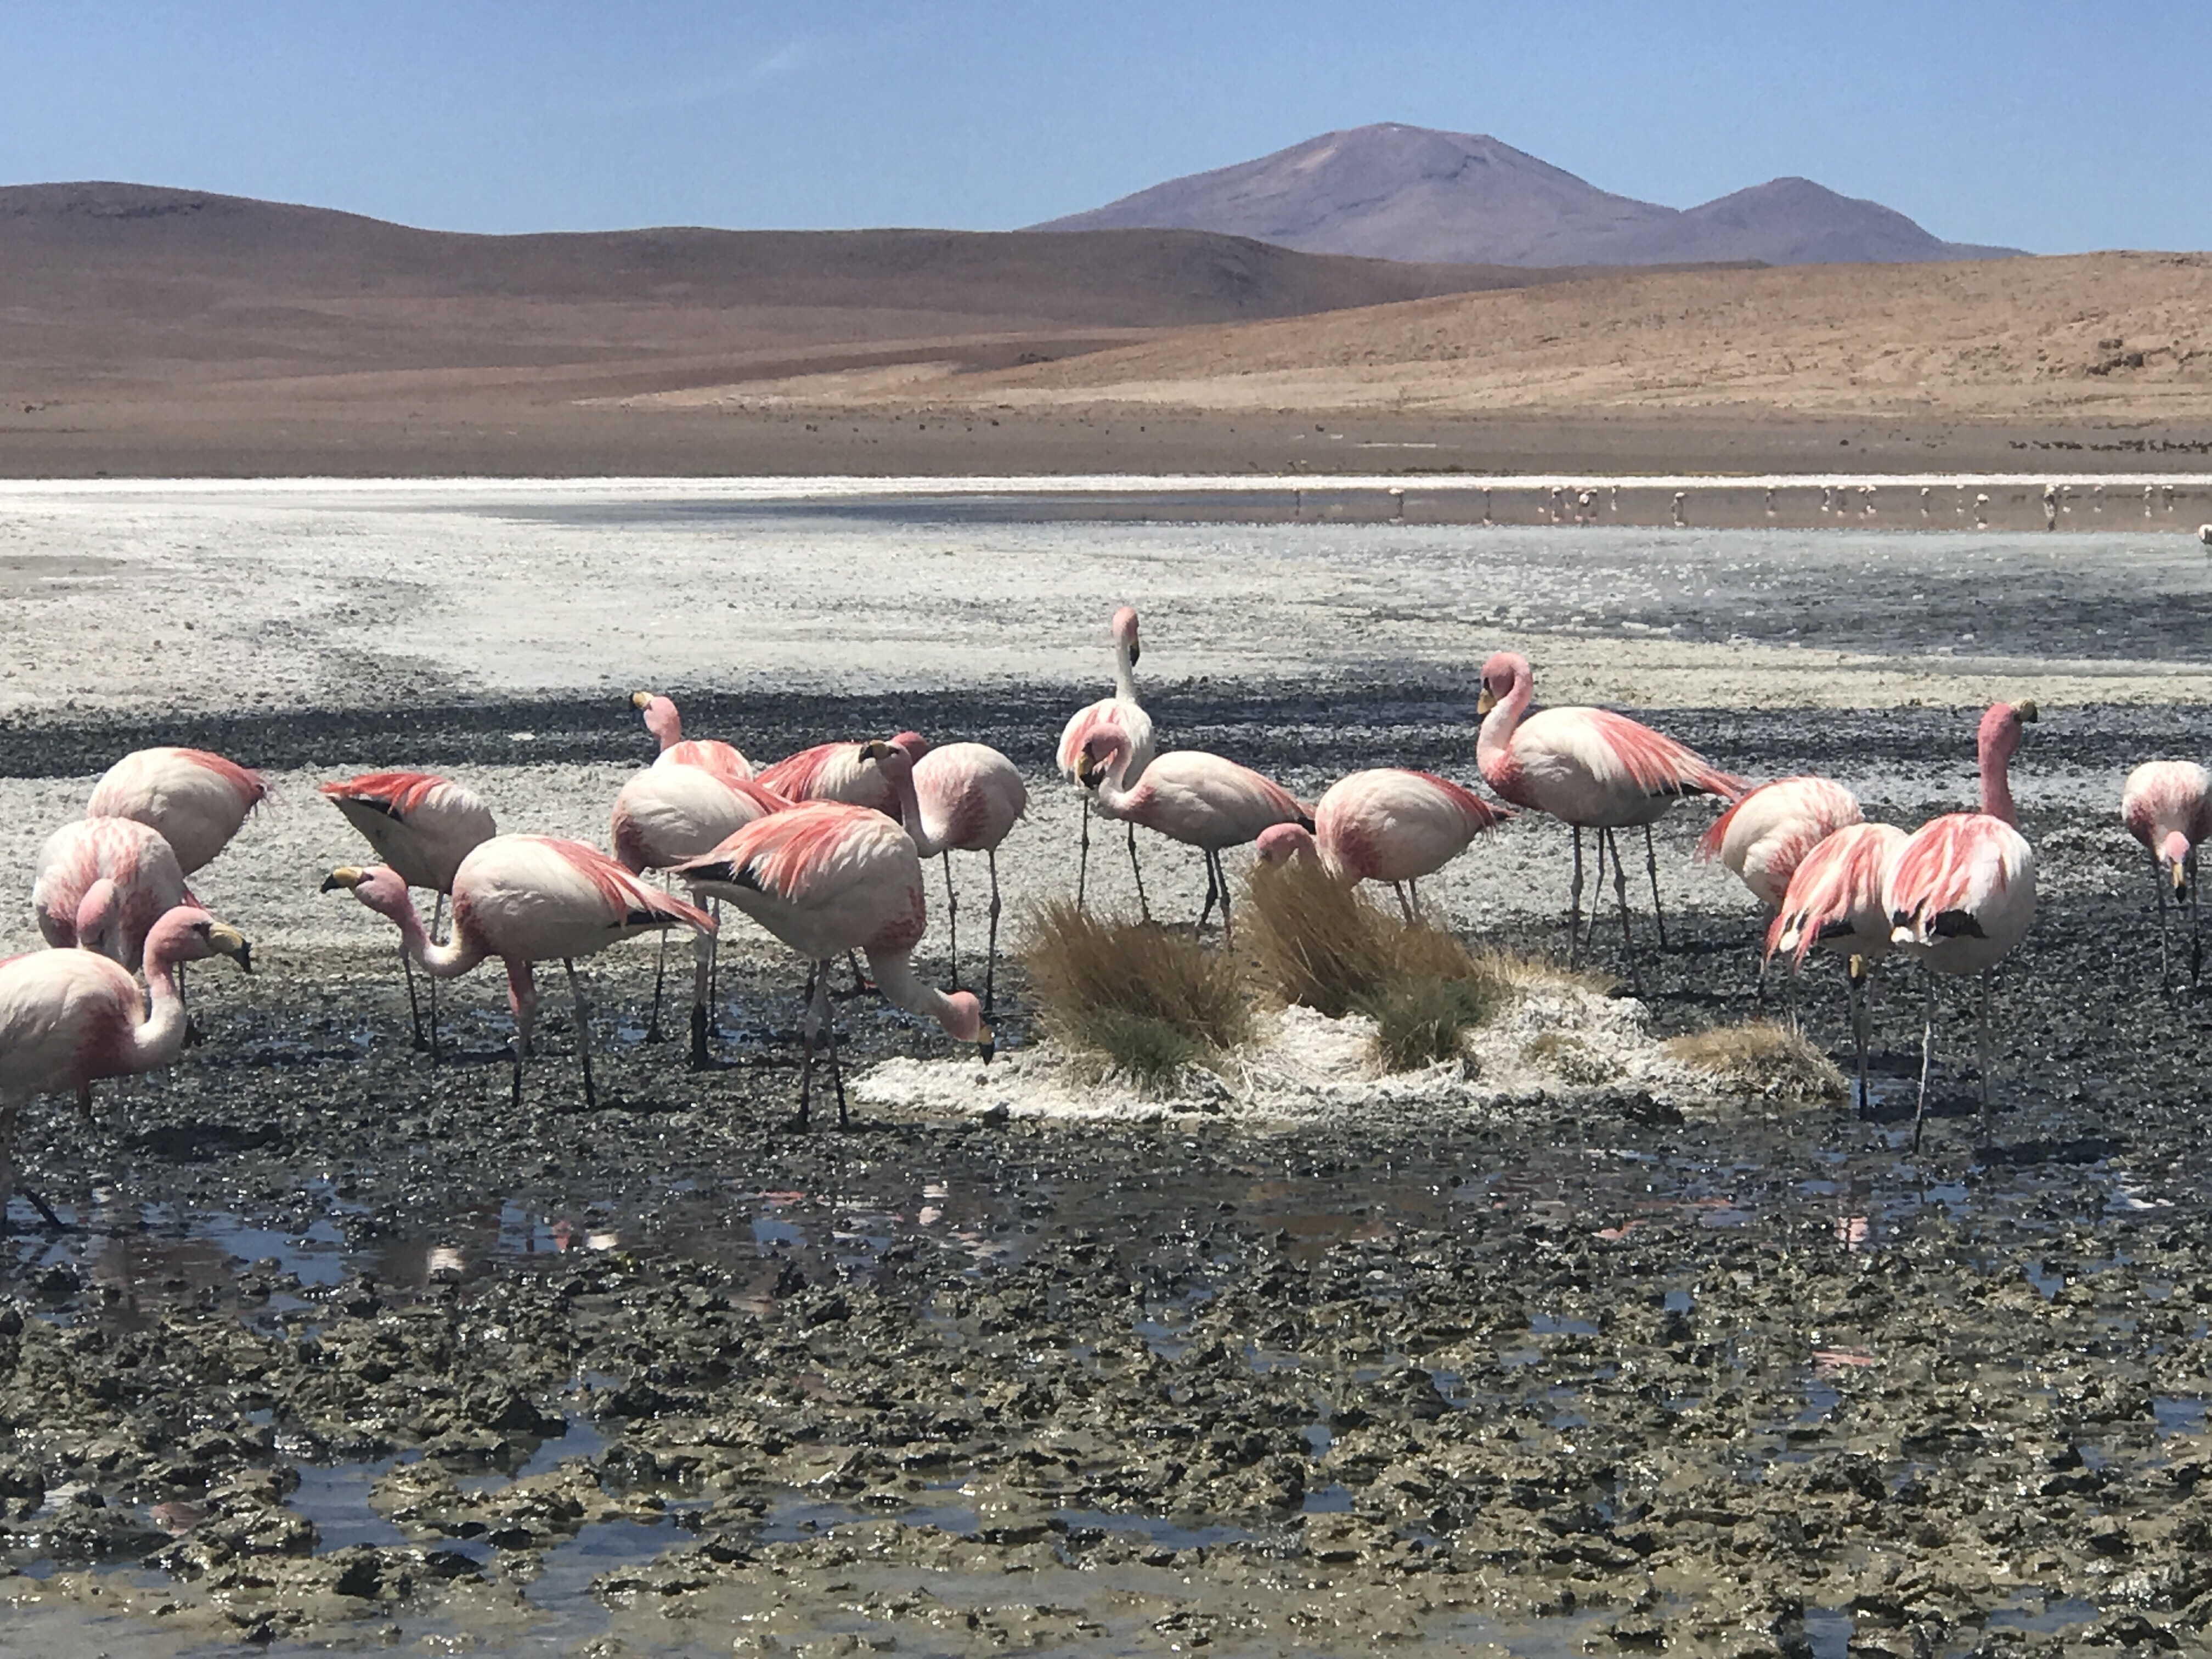 The 5 essentials tips you need to know before your trip to salar de uyuni (Flamingos)